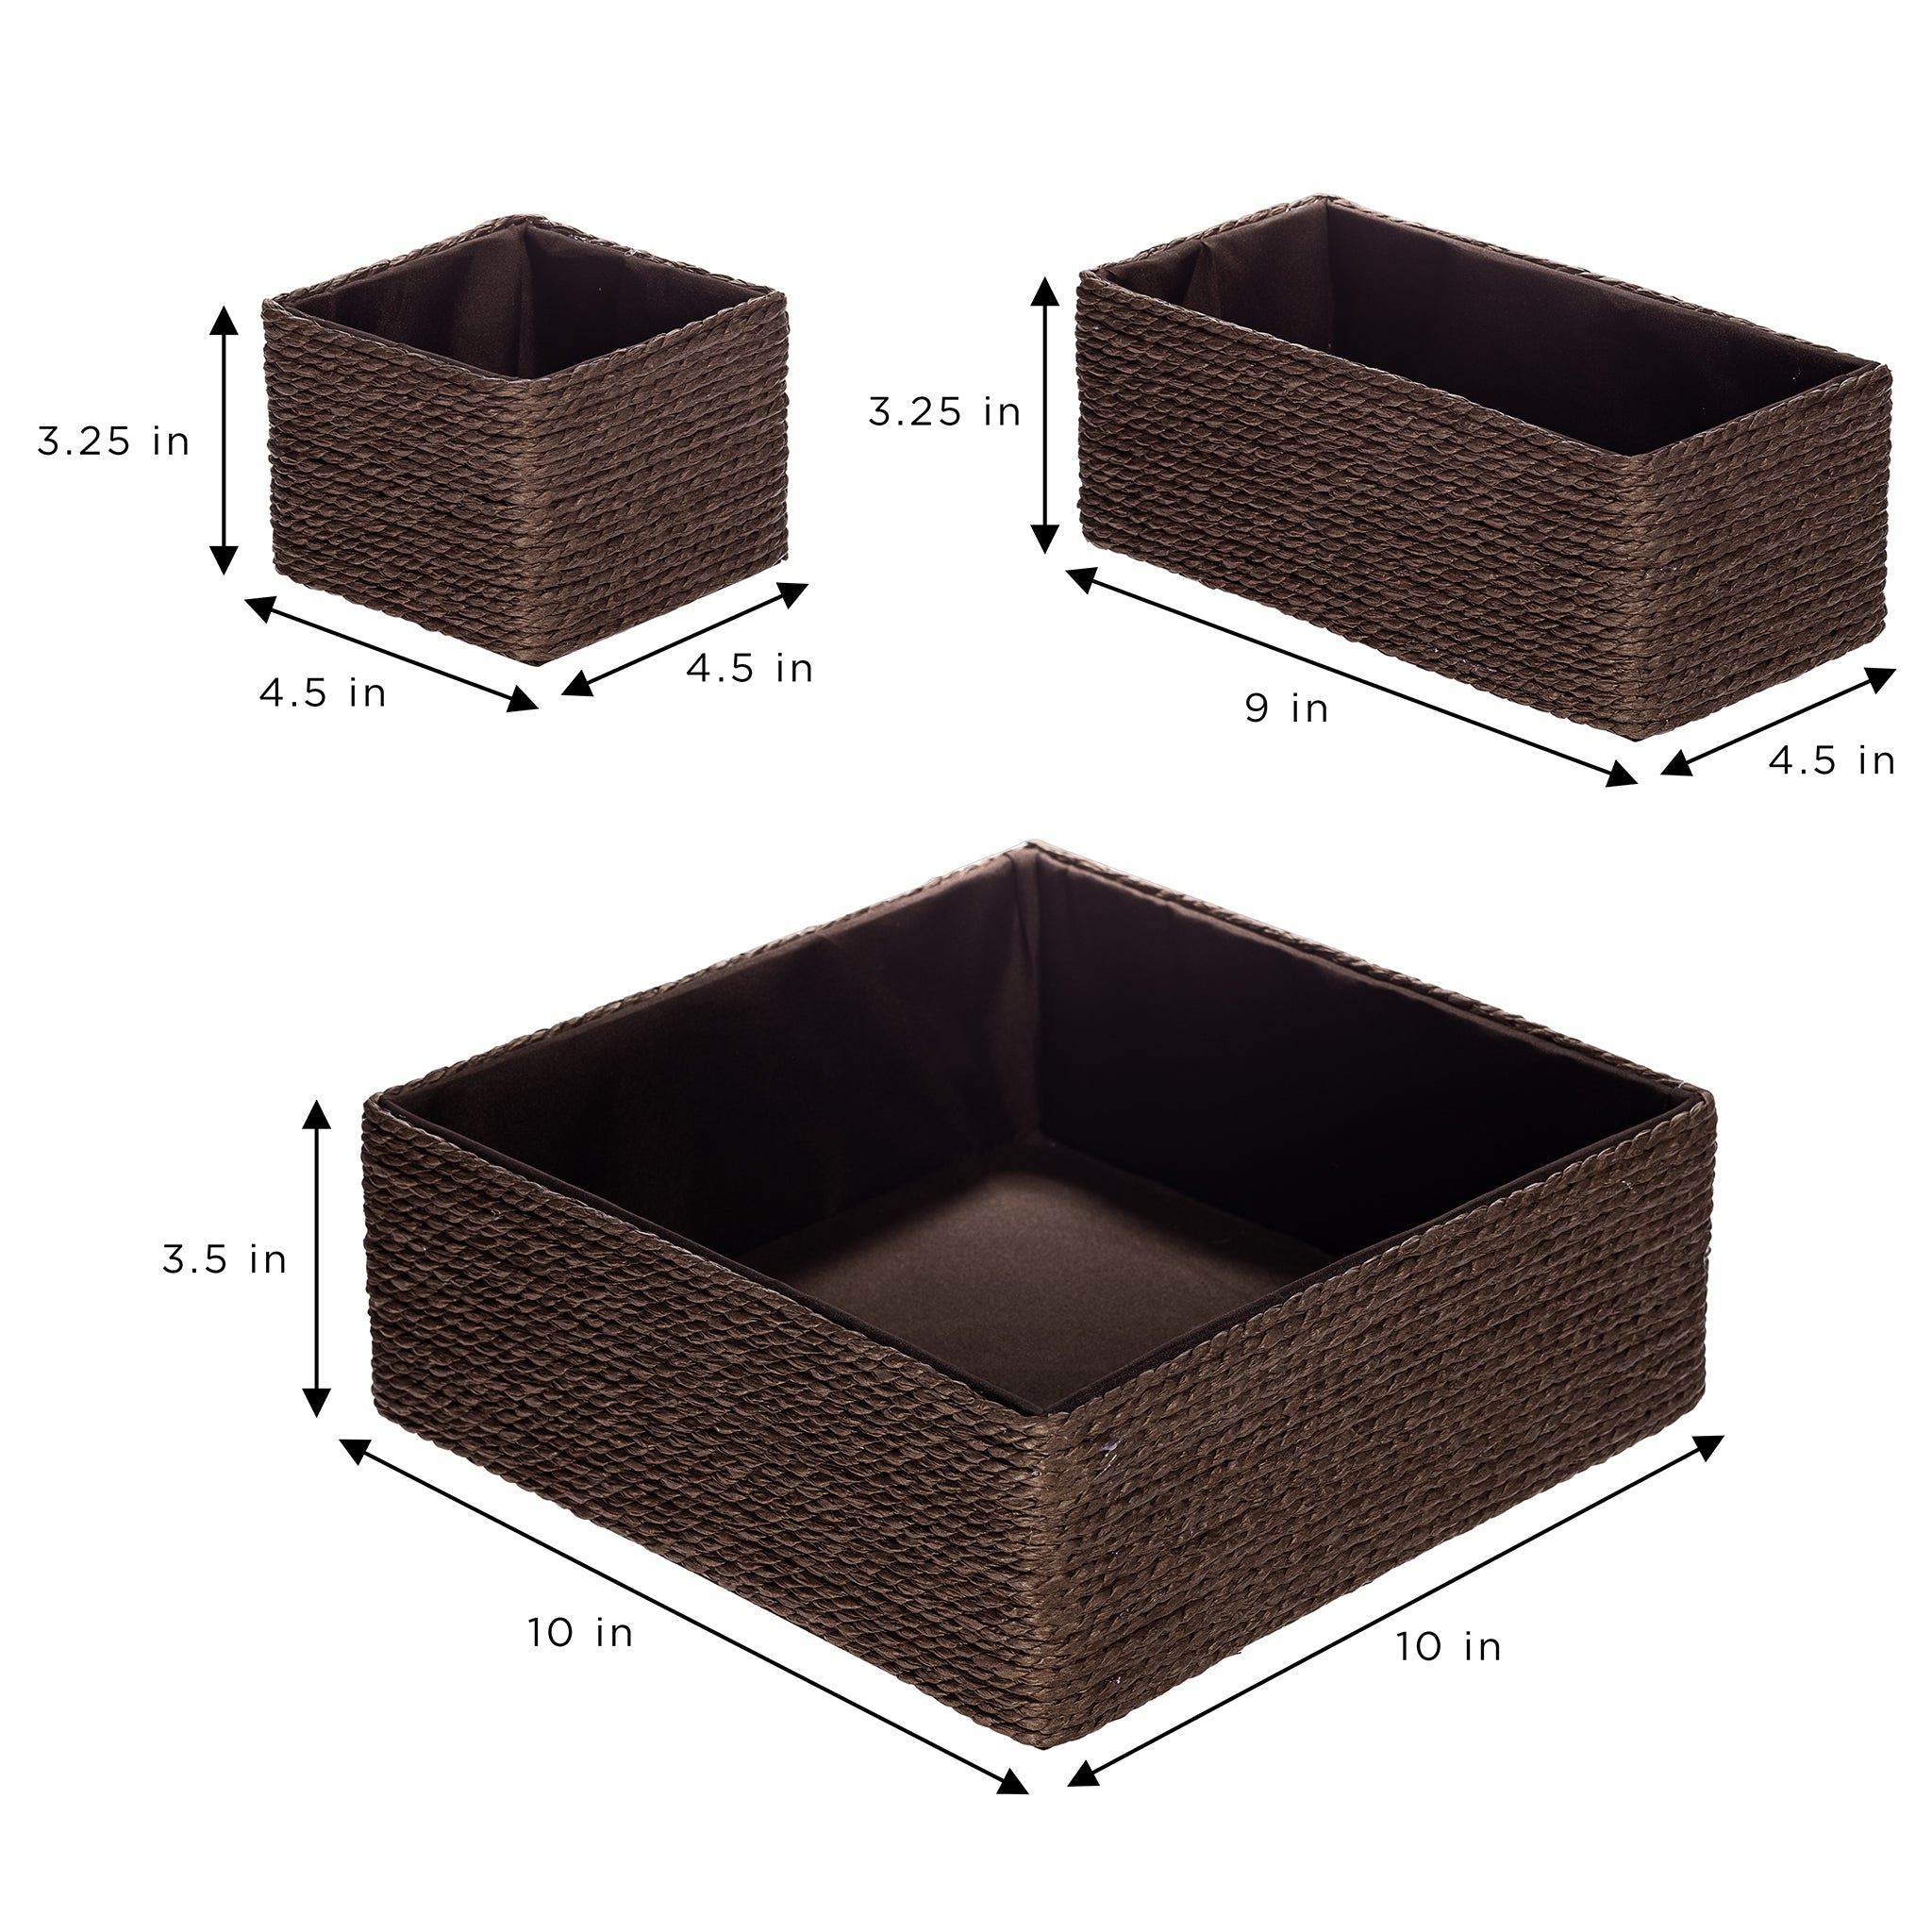 Sorbus Storage Baskets - Woven Paper Rope Material